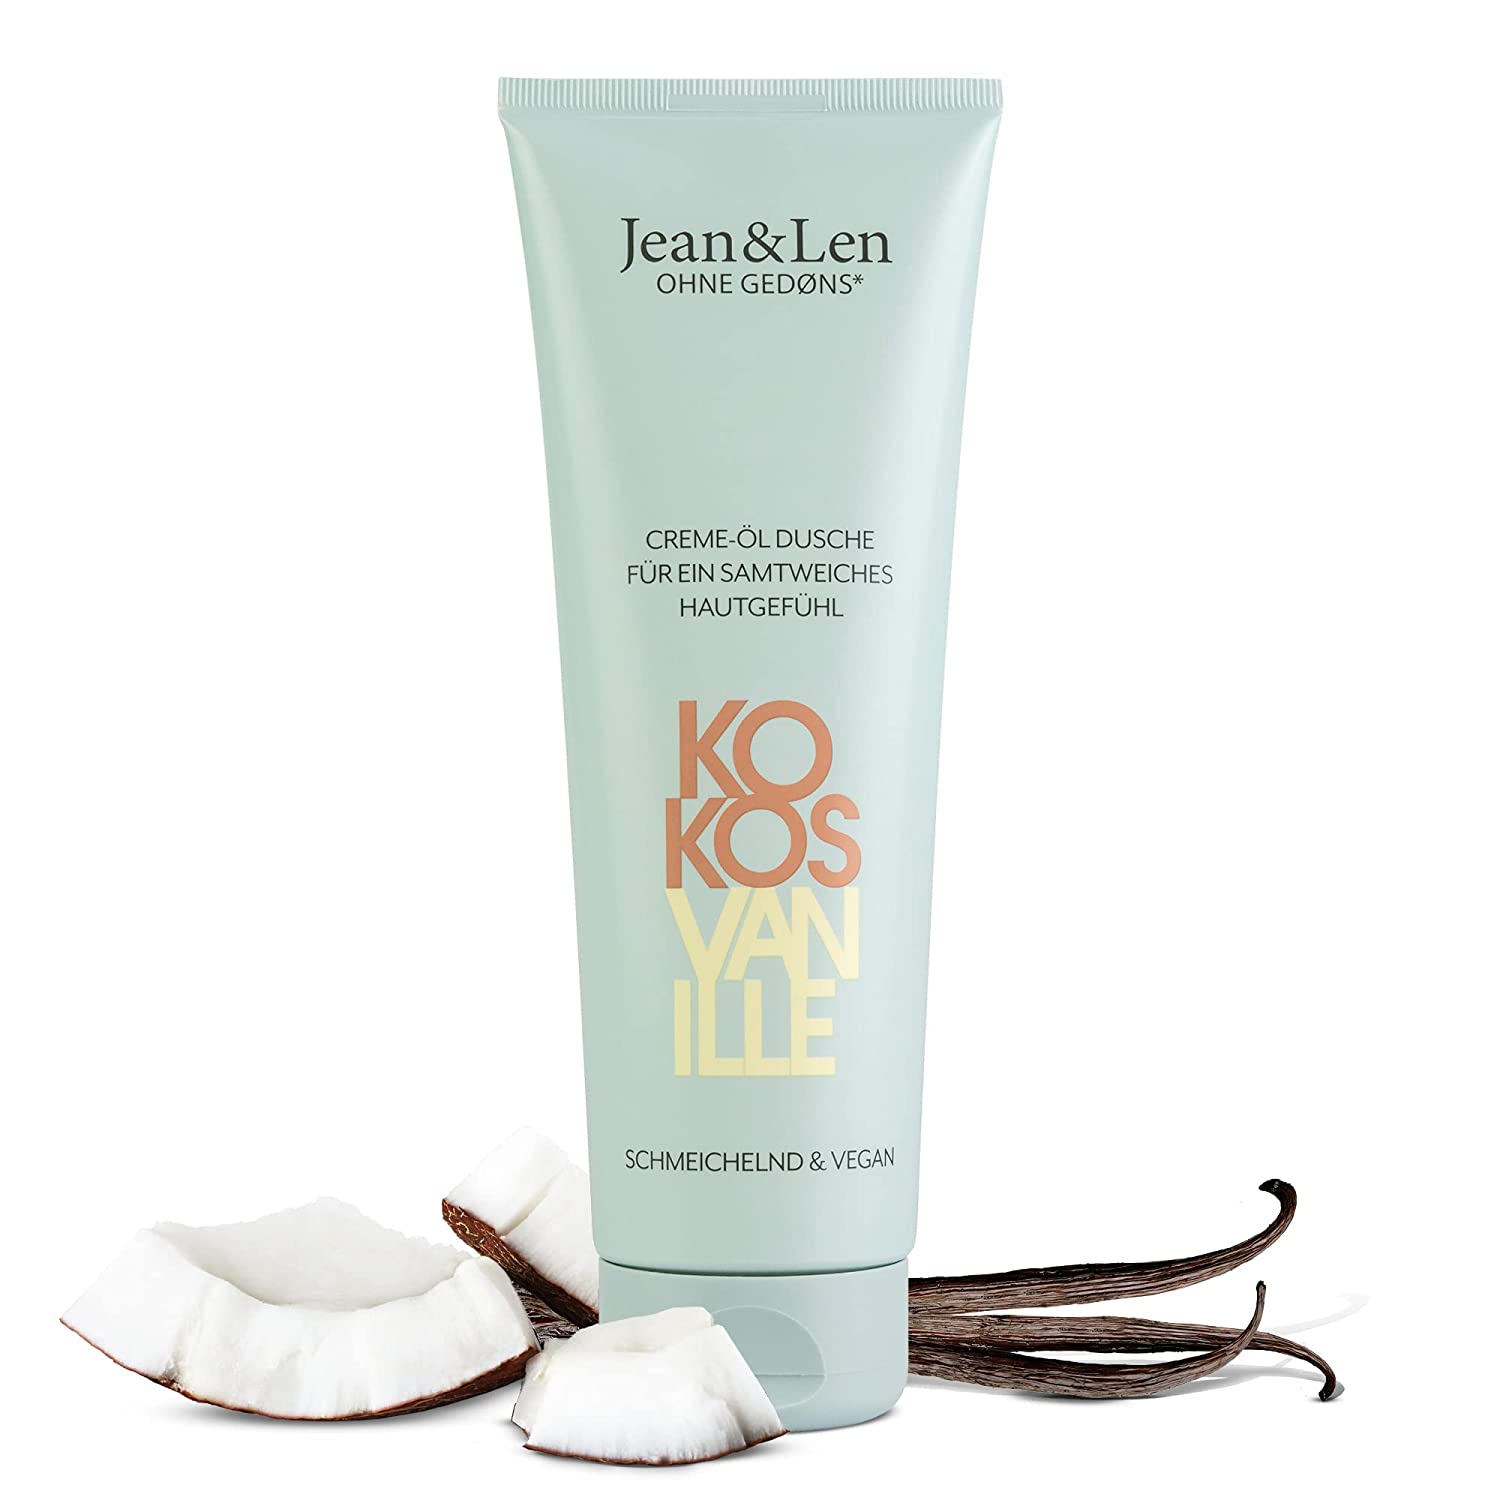 Jean & Len Cream Oil Shower Coconut & Vanilla, For Dry Skin, Rich Formulation, for a Gently Cleansed and Noticebly Smooth Skin Feeling, PH Skinteal, Vegan Shower Gel, 250 ml, ‎transparent